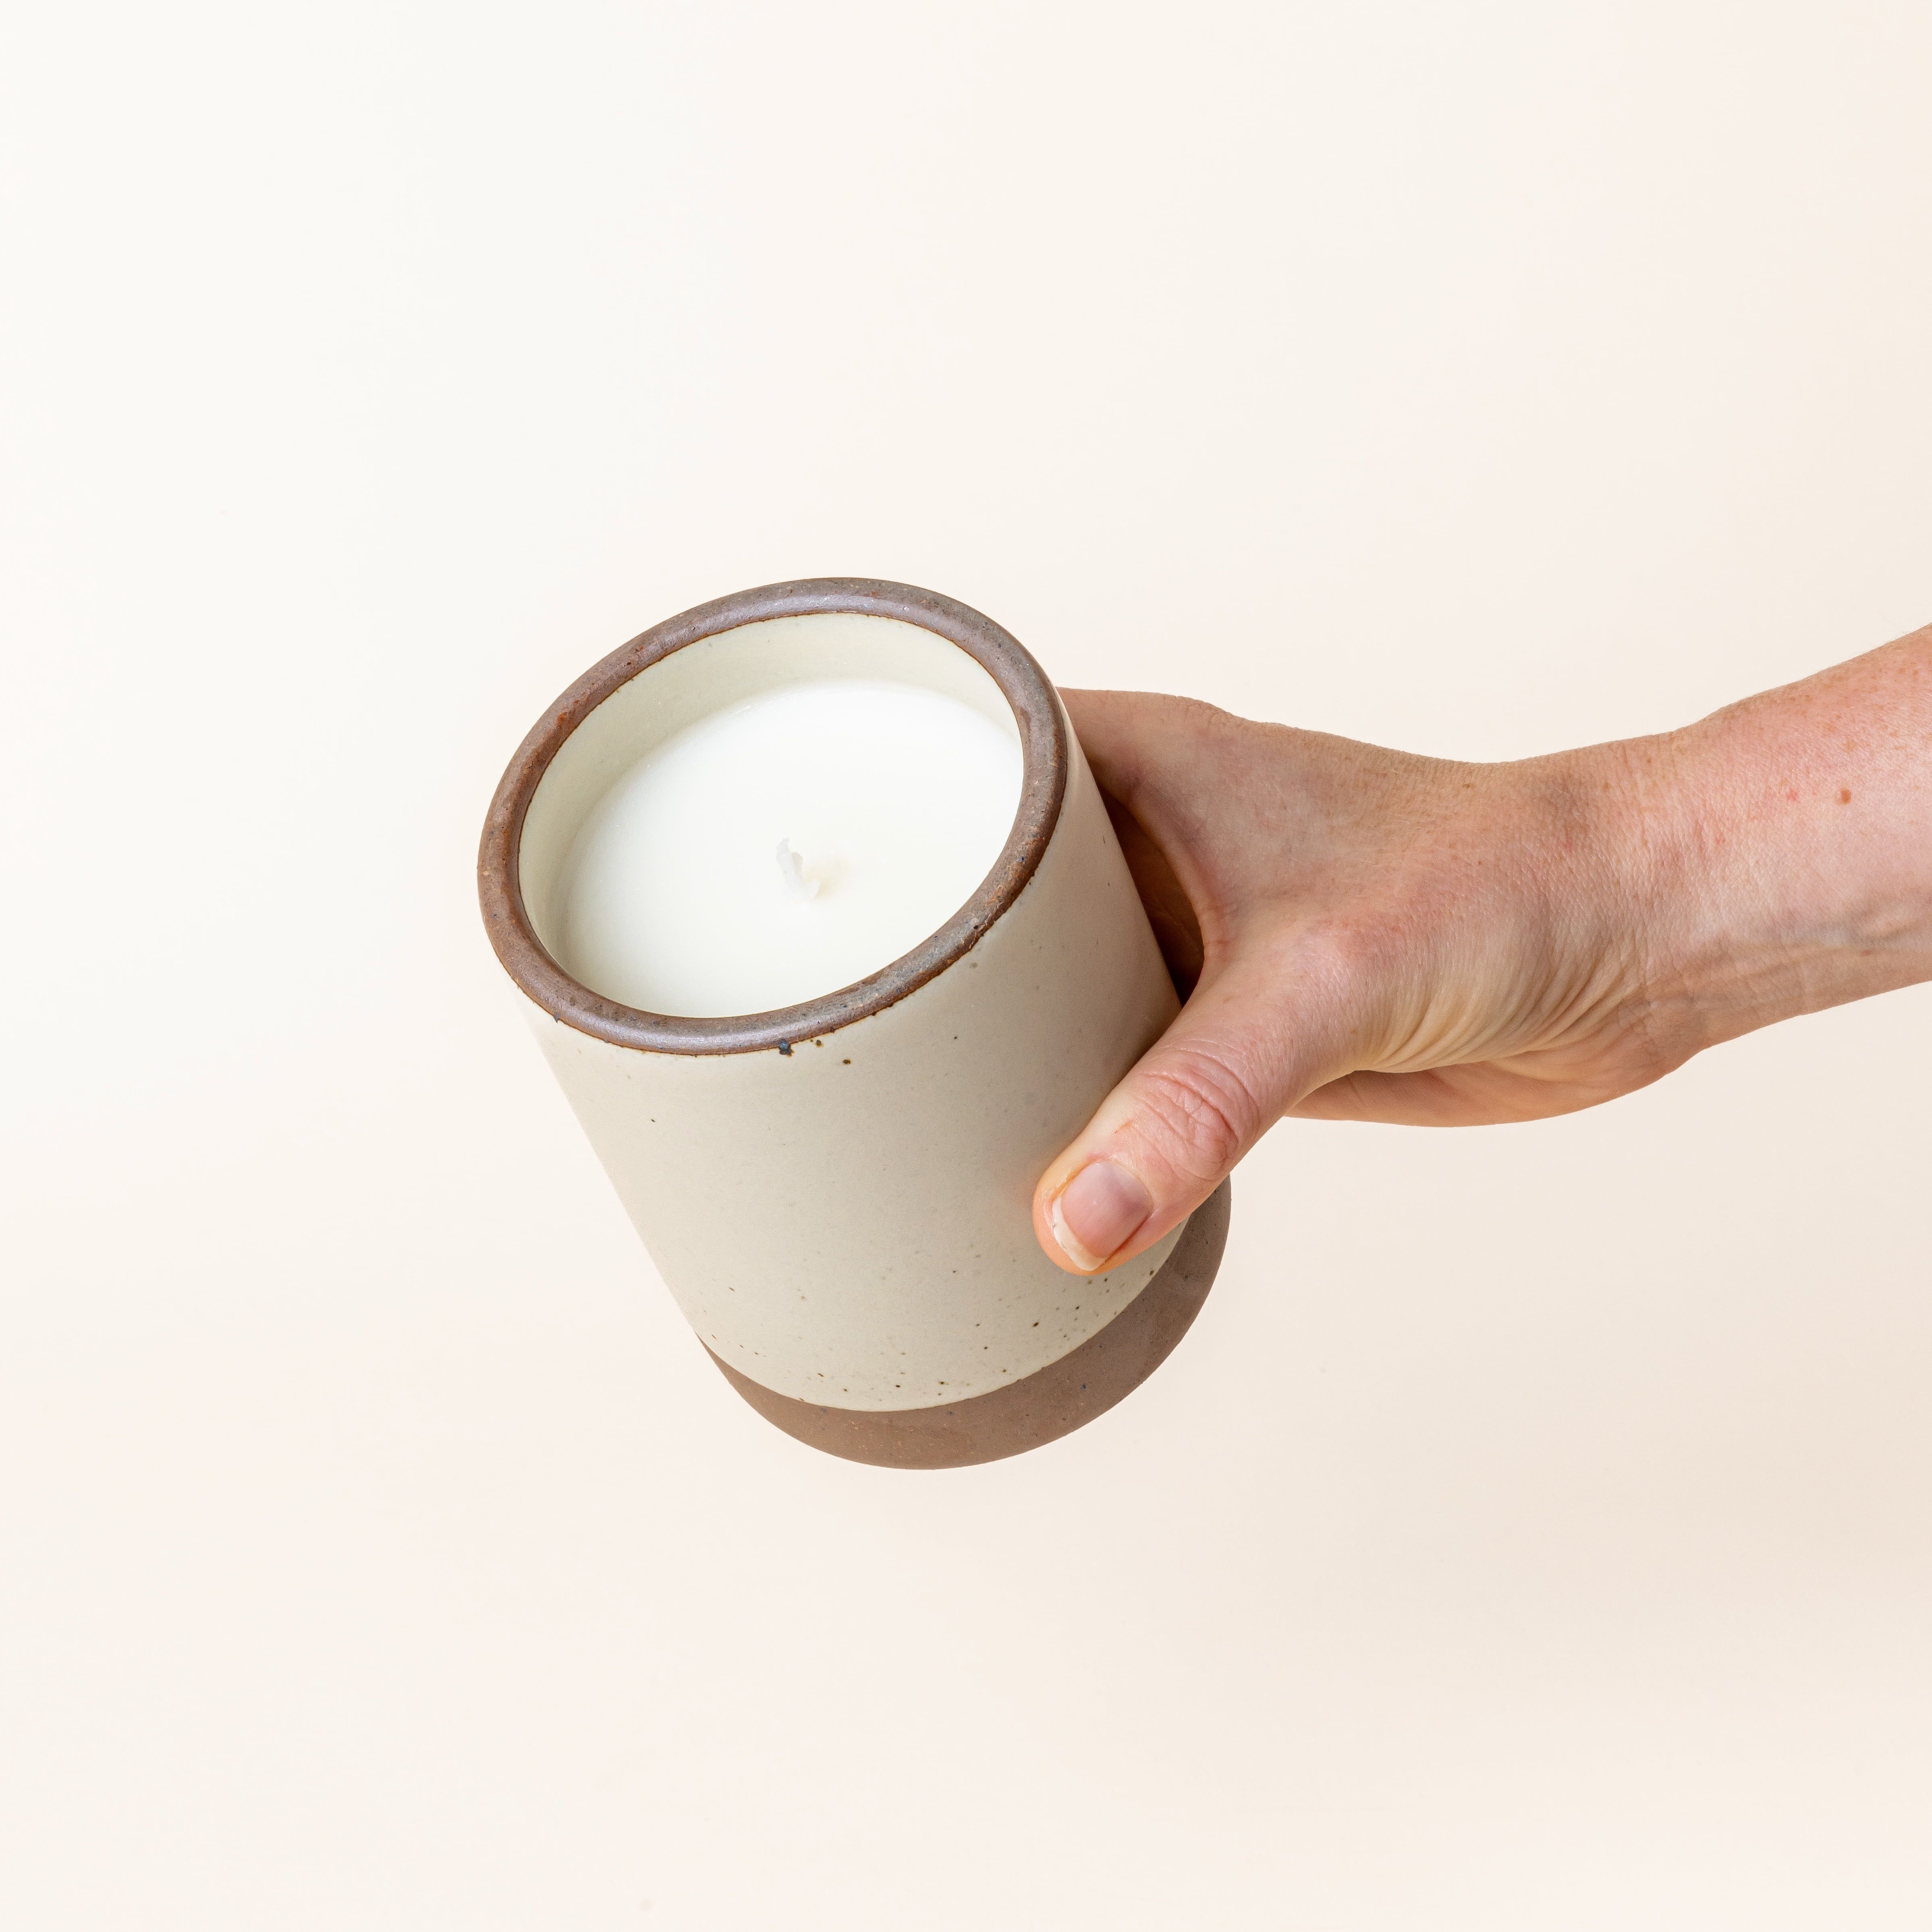 Hand holding a large ceramic vessel in a warm, tan-toned, off-white color with candle inside.